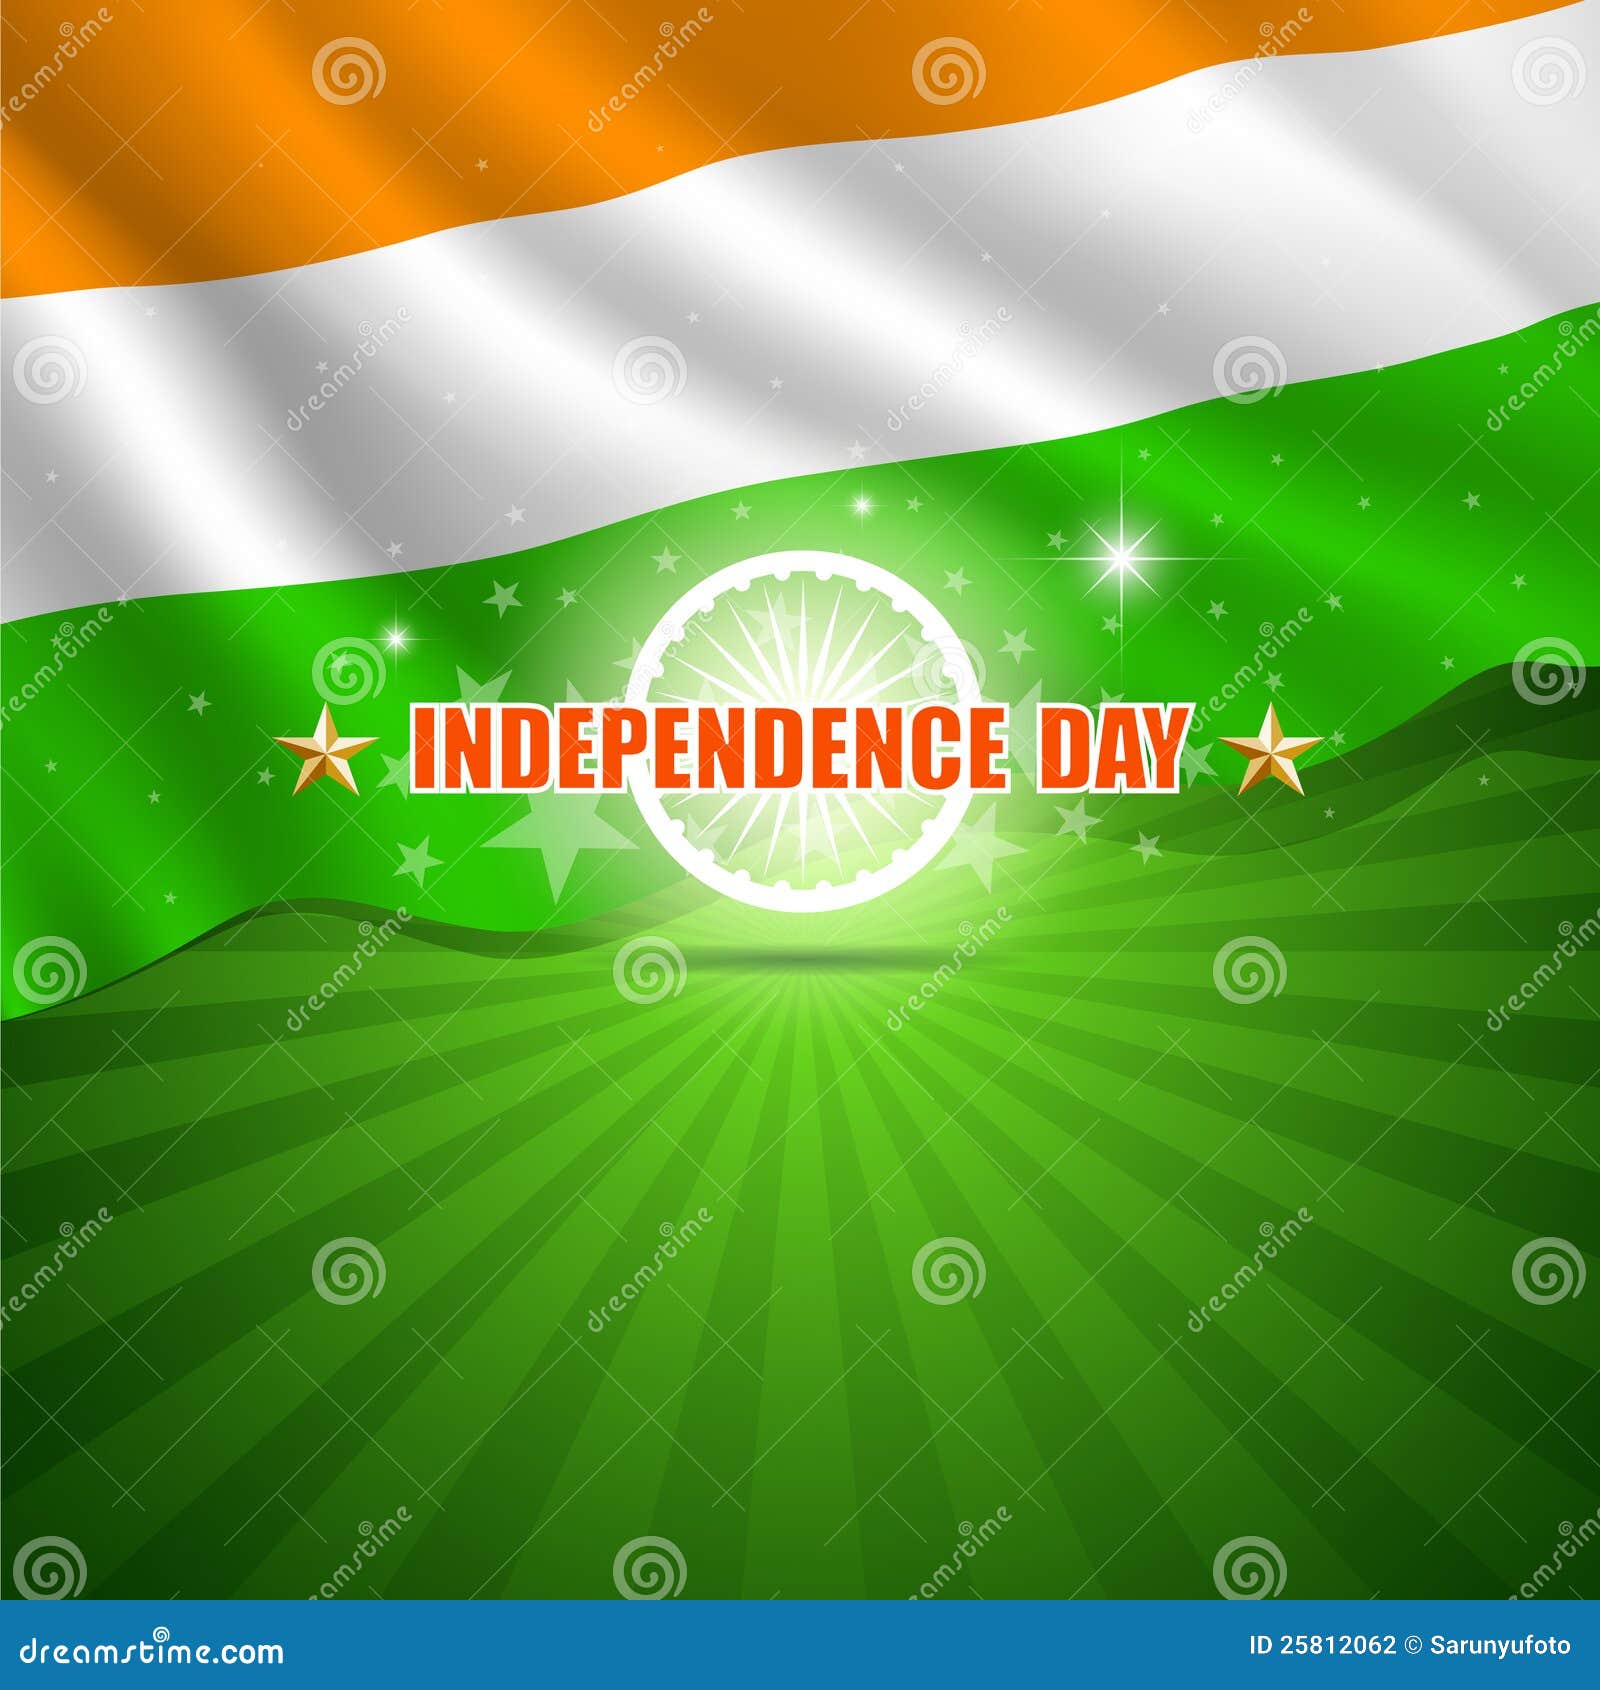 Happy Independence Day India Stock Illustration - Illustration of ...